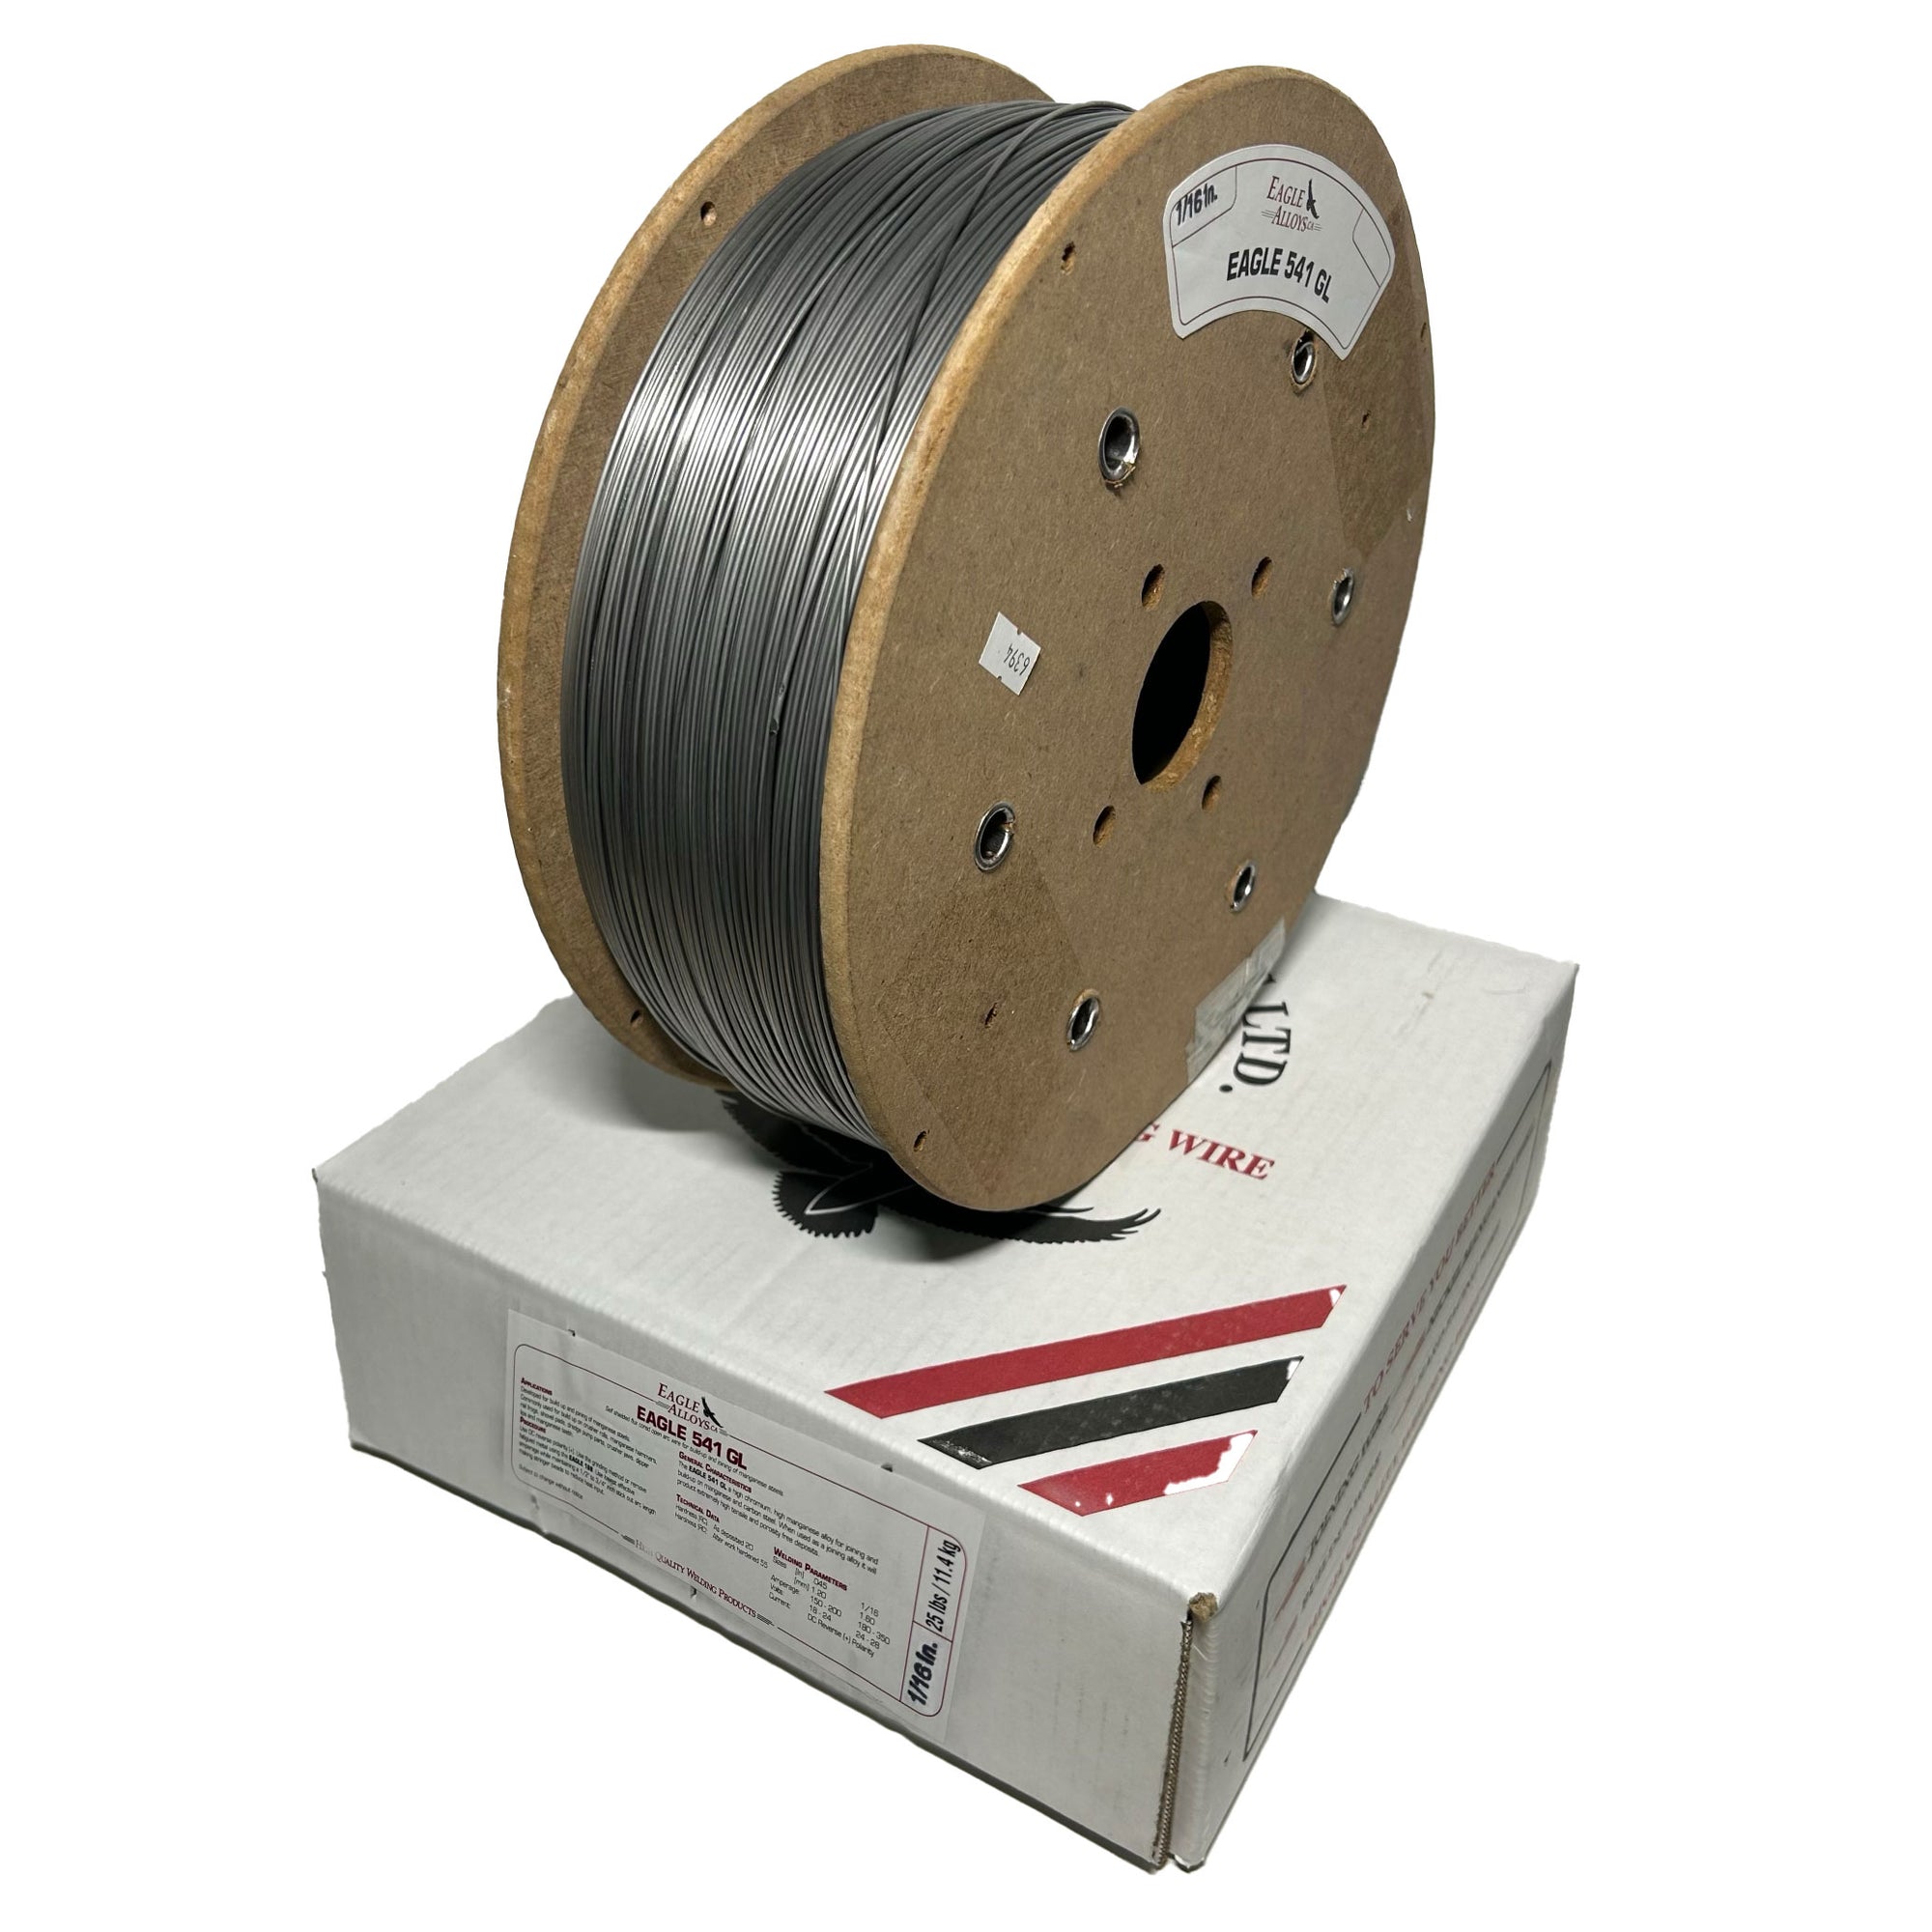 EAGLE 541 GL  Self Shielded Flux Cored Open Arc Wire For Build-up On Manganese Steels